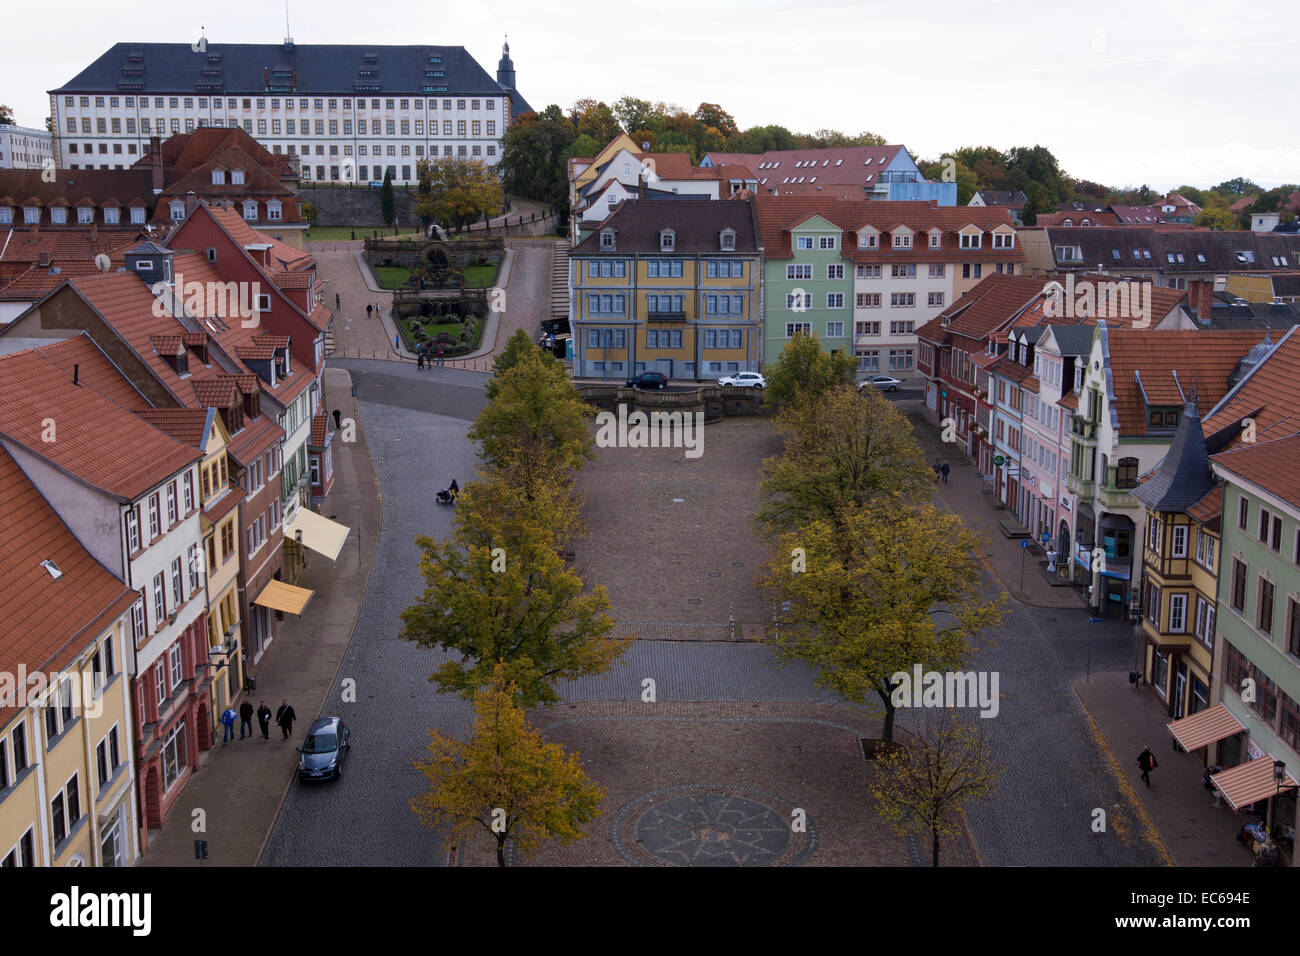 View from the town hall tower towards the Hauptmarkt square and Schloss Friedenstein castle, Gotha, Thuringia, Germany, Europe Stock Photo